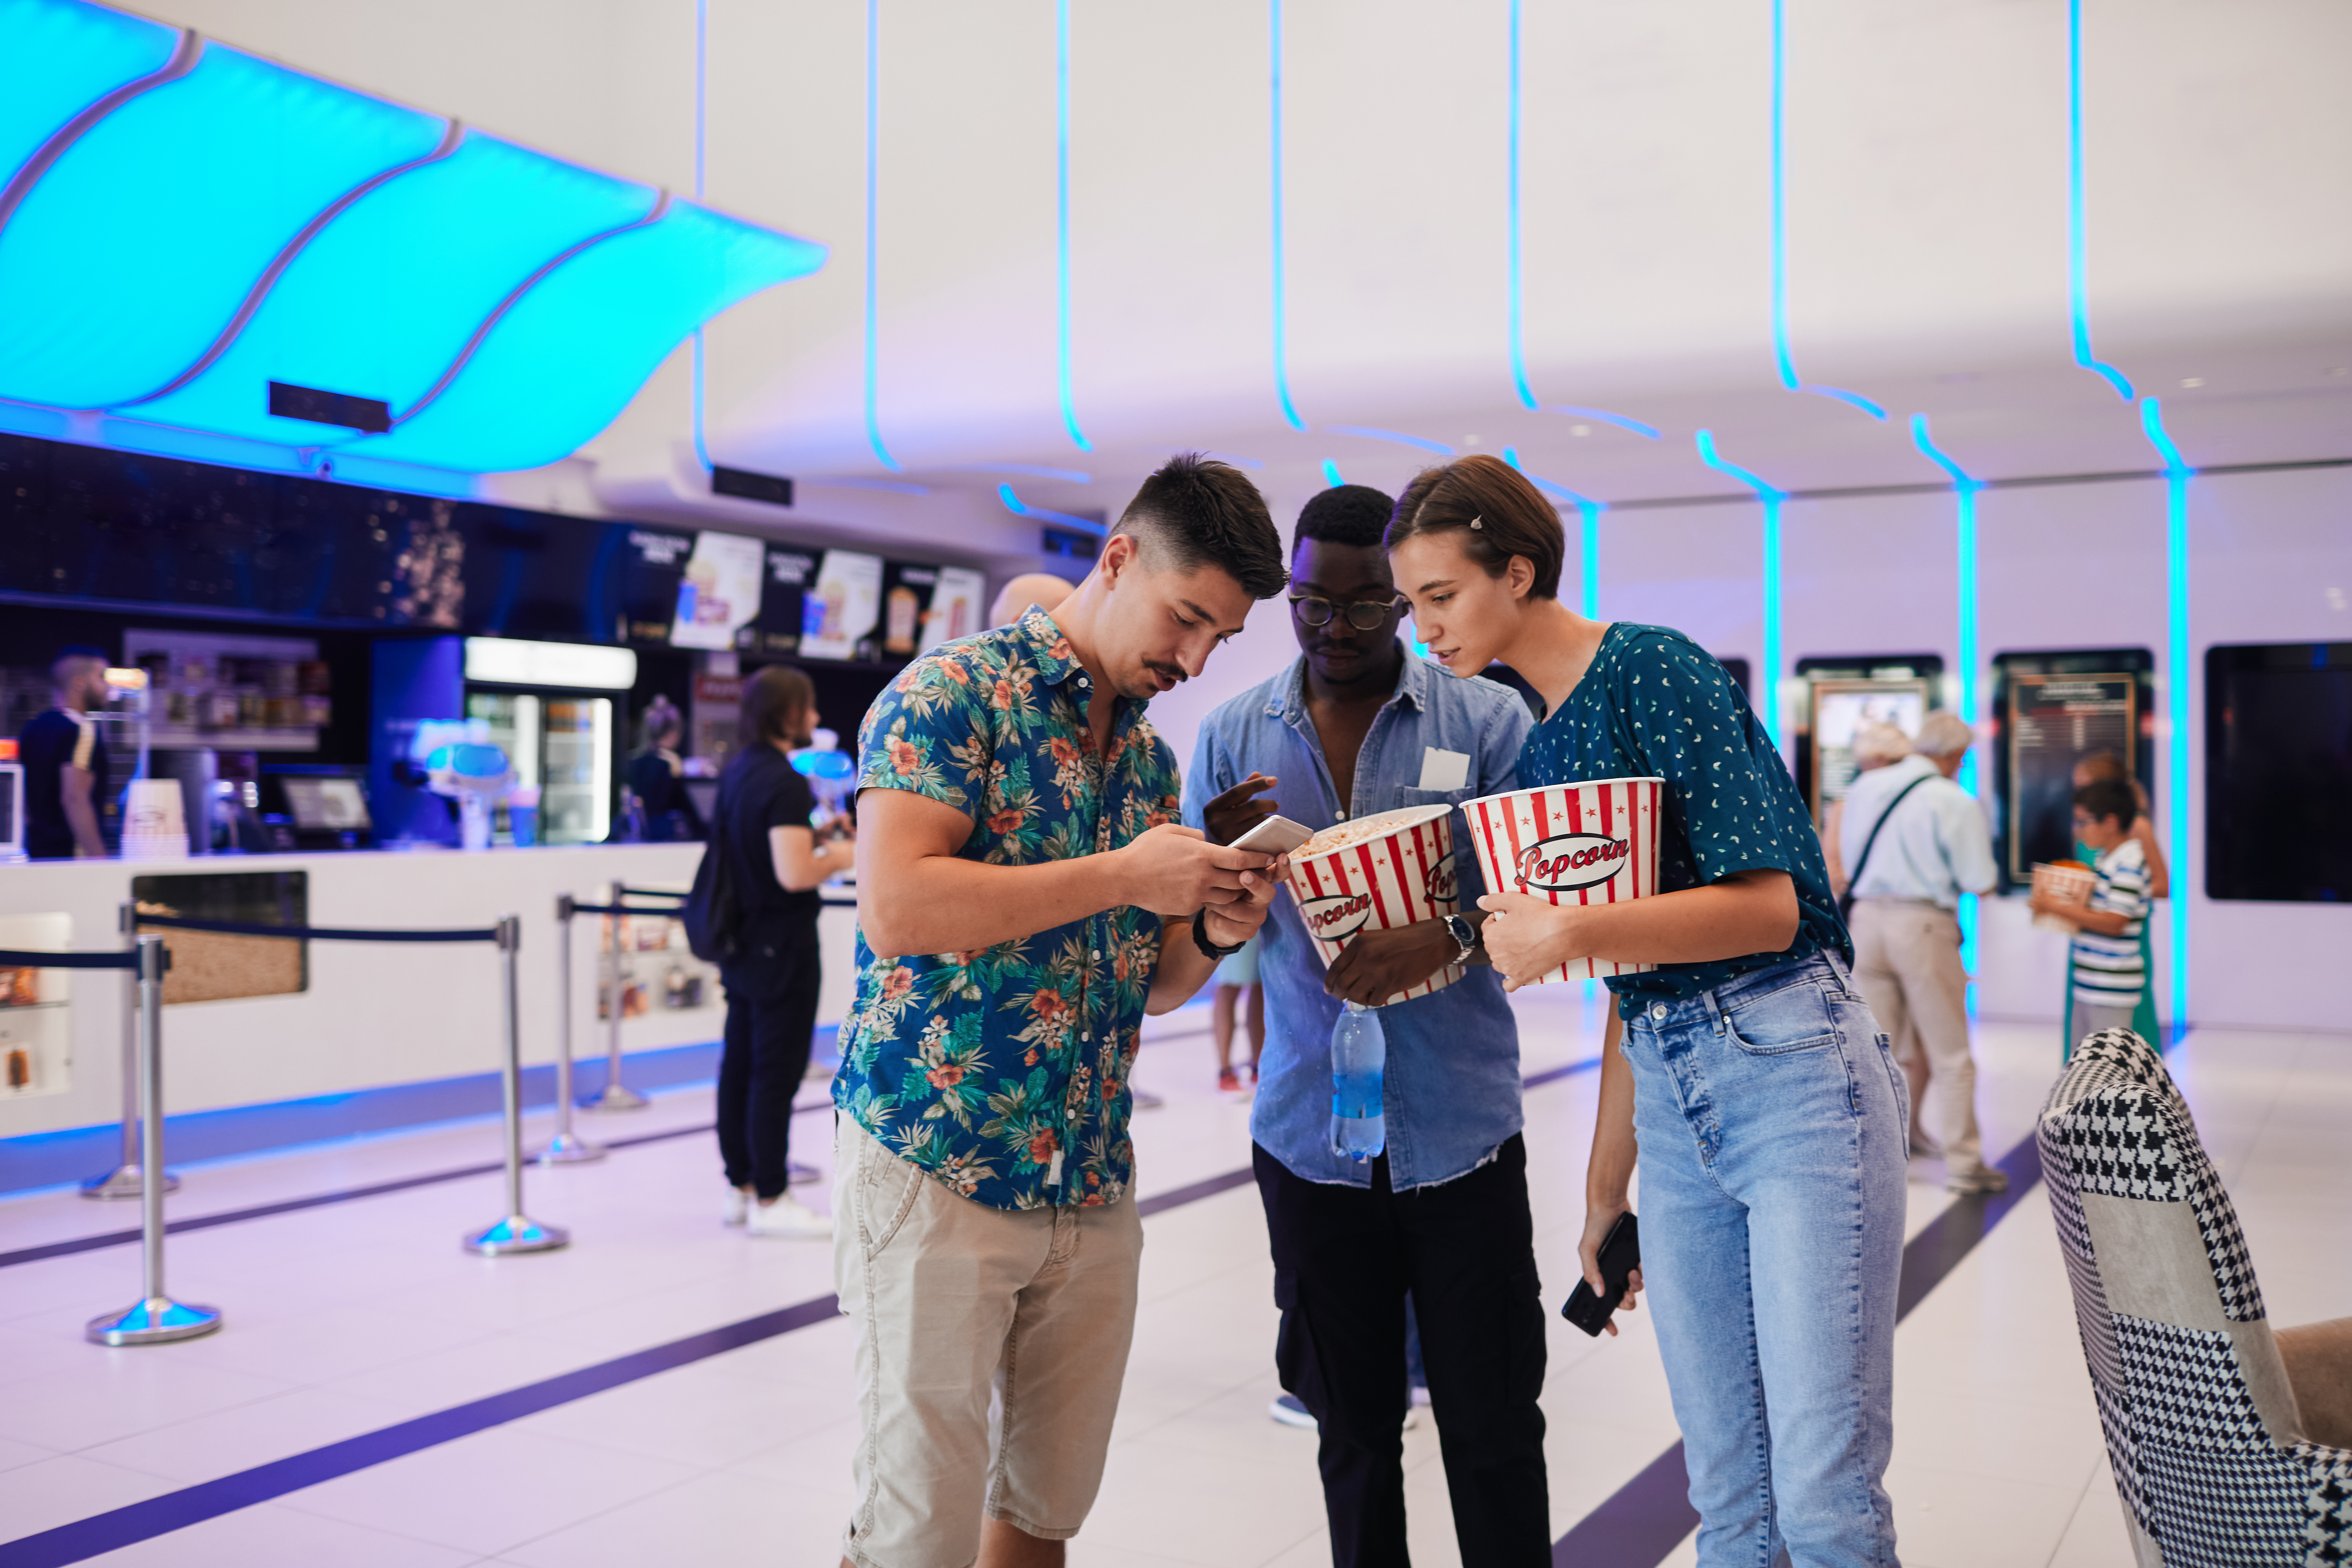 Three people at a movie theater, with two holding popcorn, all leaning over one phone